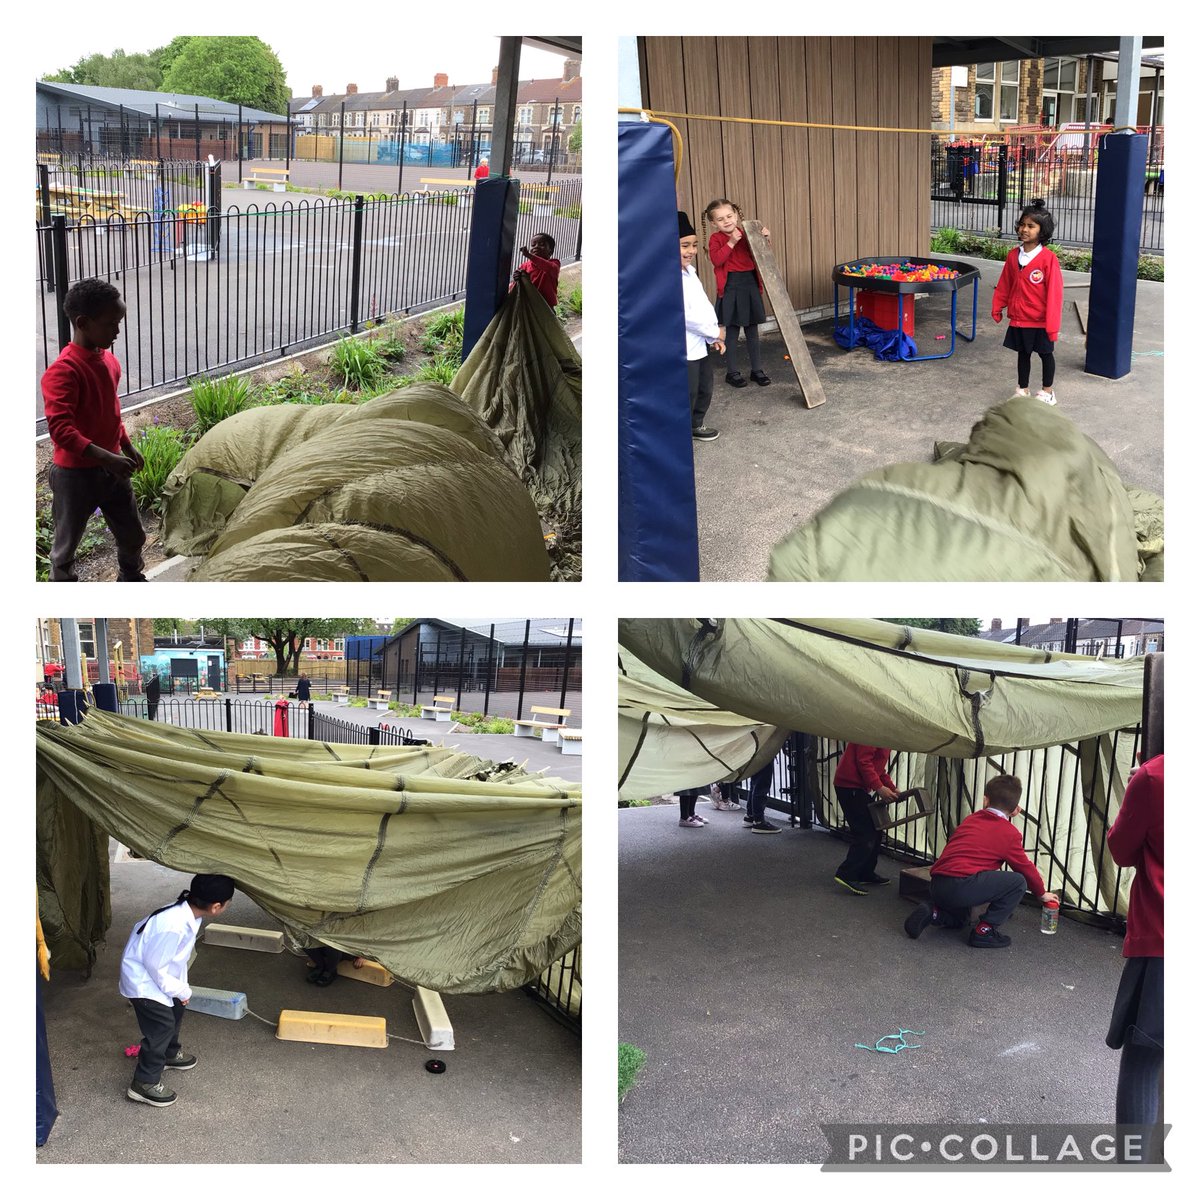 For their open challenge Dosbarth Hazel wanted to see if they could build a tent or den big enough for everyone to fit inside. They didn’t want anyone to be left out! After lots of teamwork, discussion and problem solving this morning they did it and enjoyed their snack together!